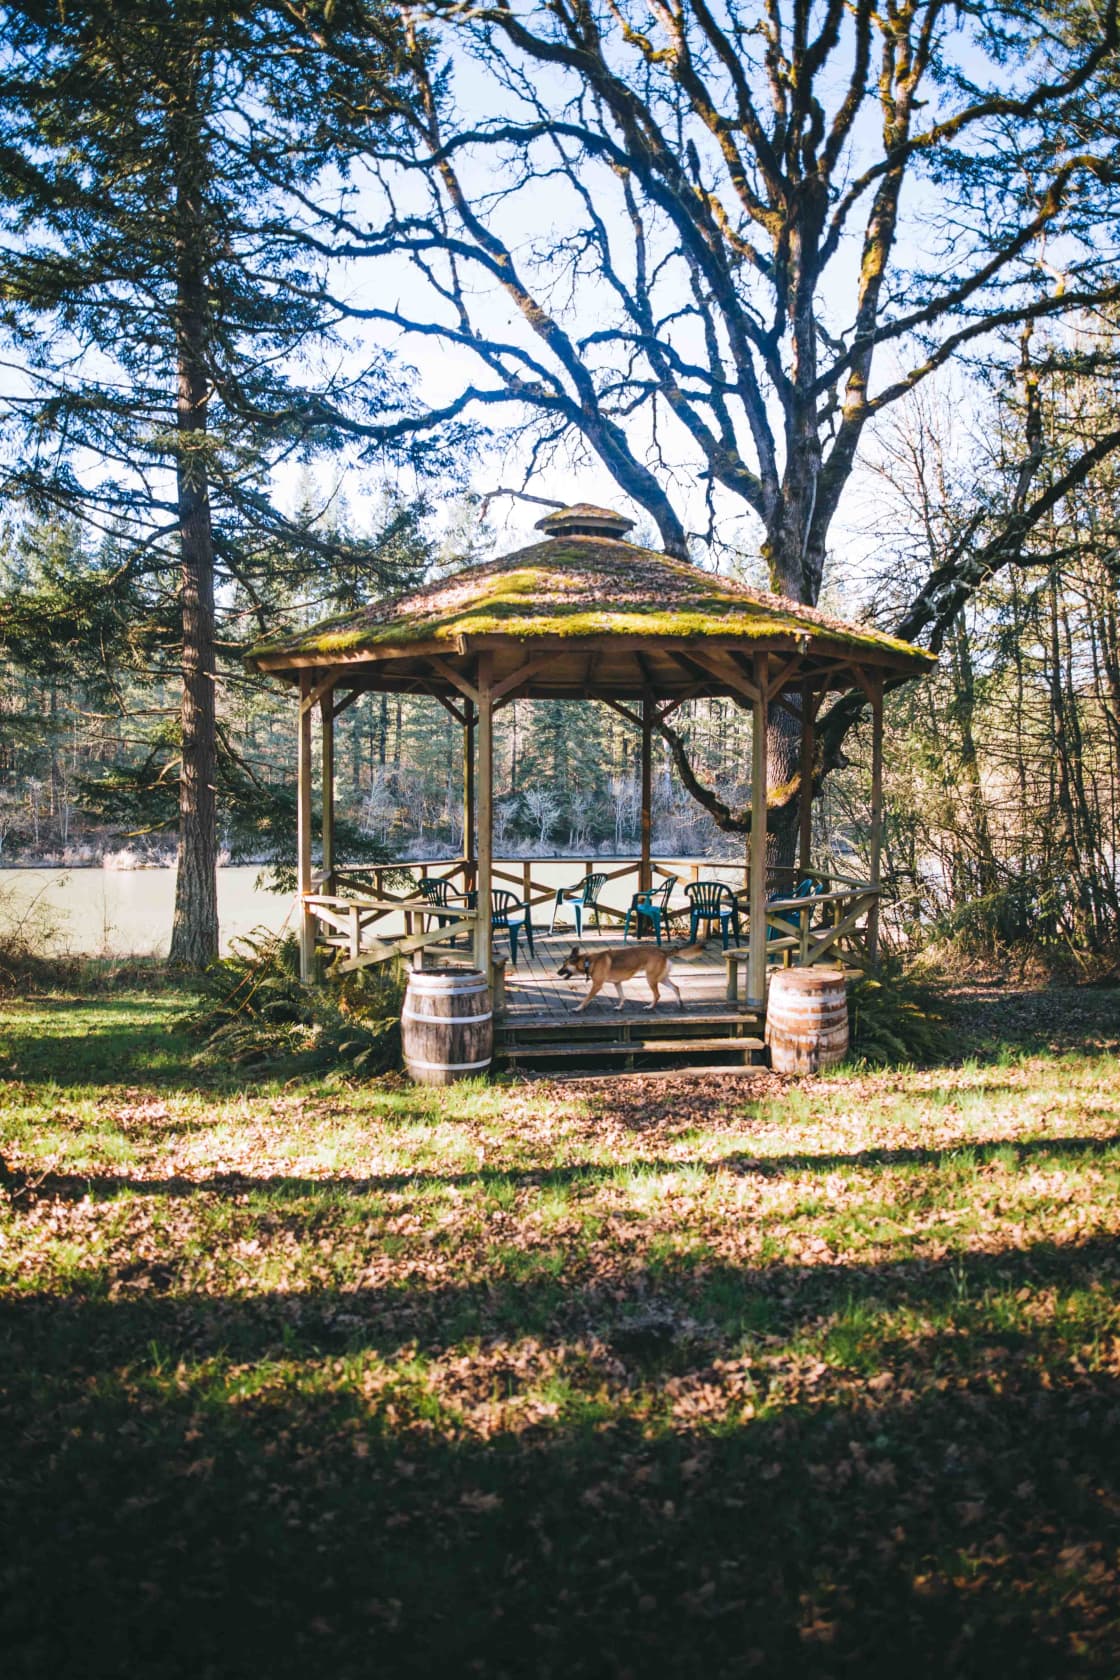 This gazebo would be super useful for more people!